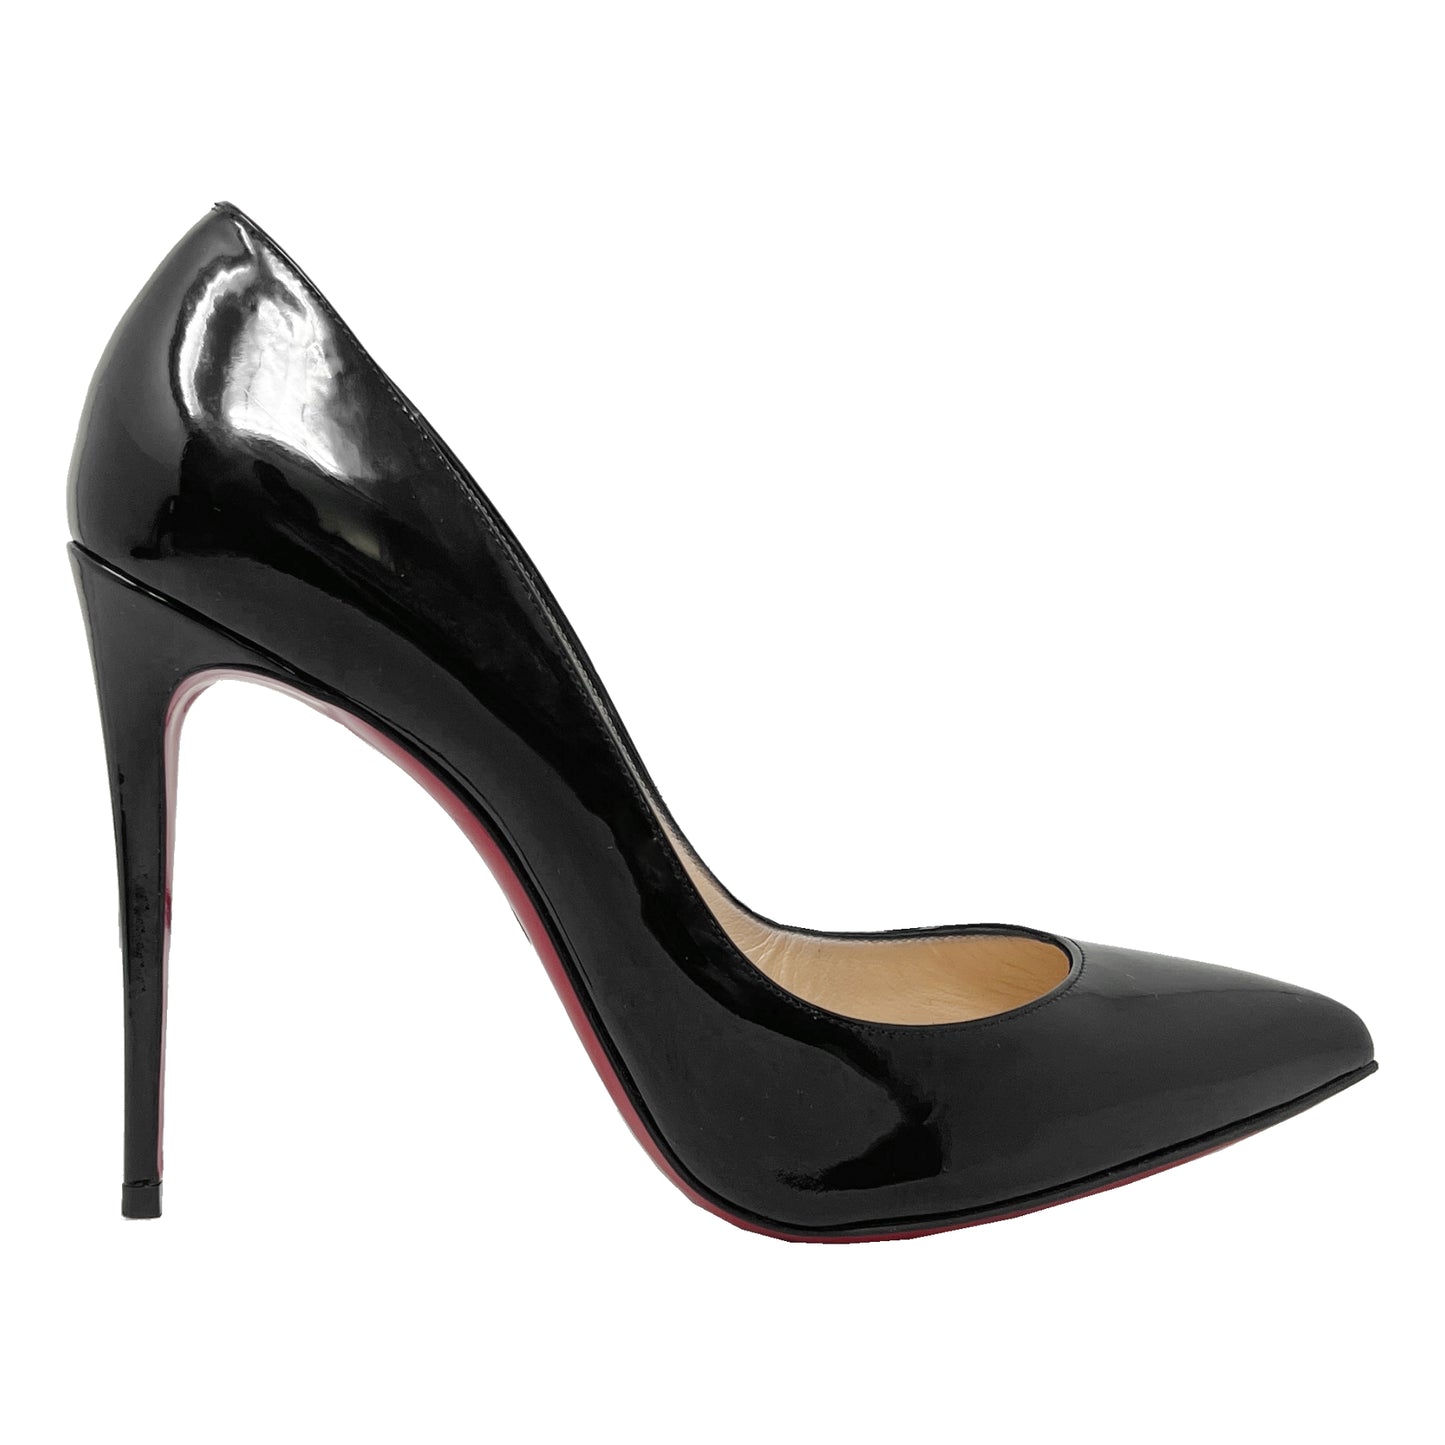 Christian Louboutin Pigalle 100 Black Patent Leather Pointed Toe Pumps Heels